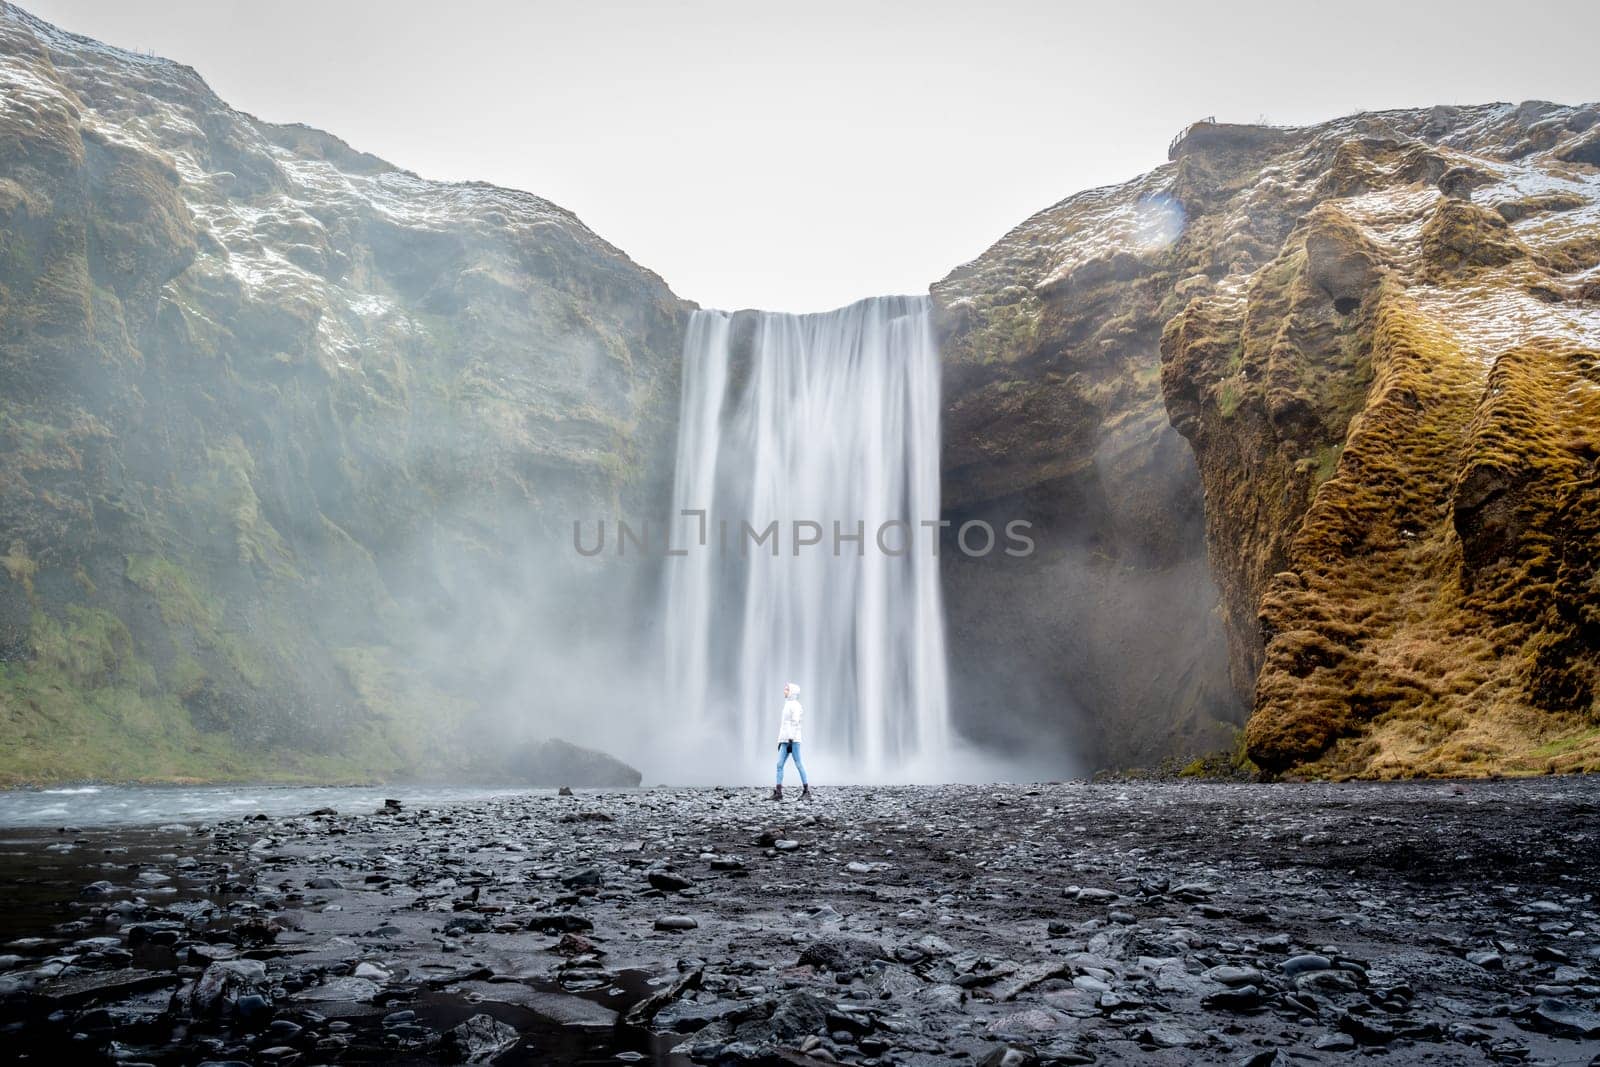 Unknown woman with white jacket from behind in Skogafoss, by LopezPastor